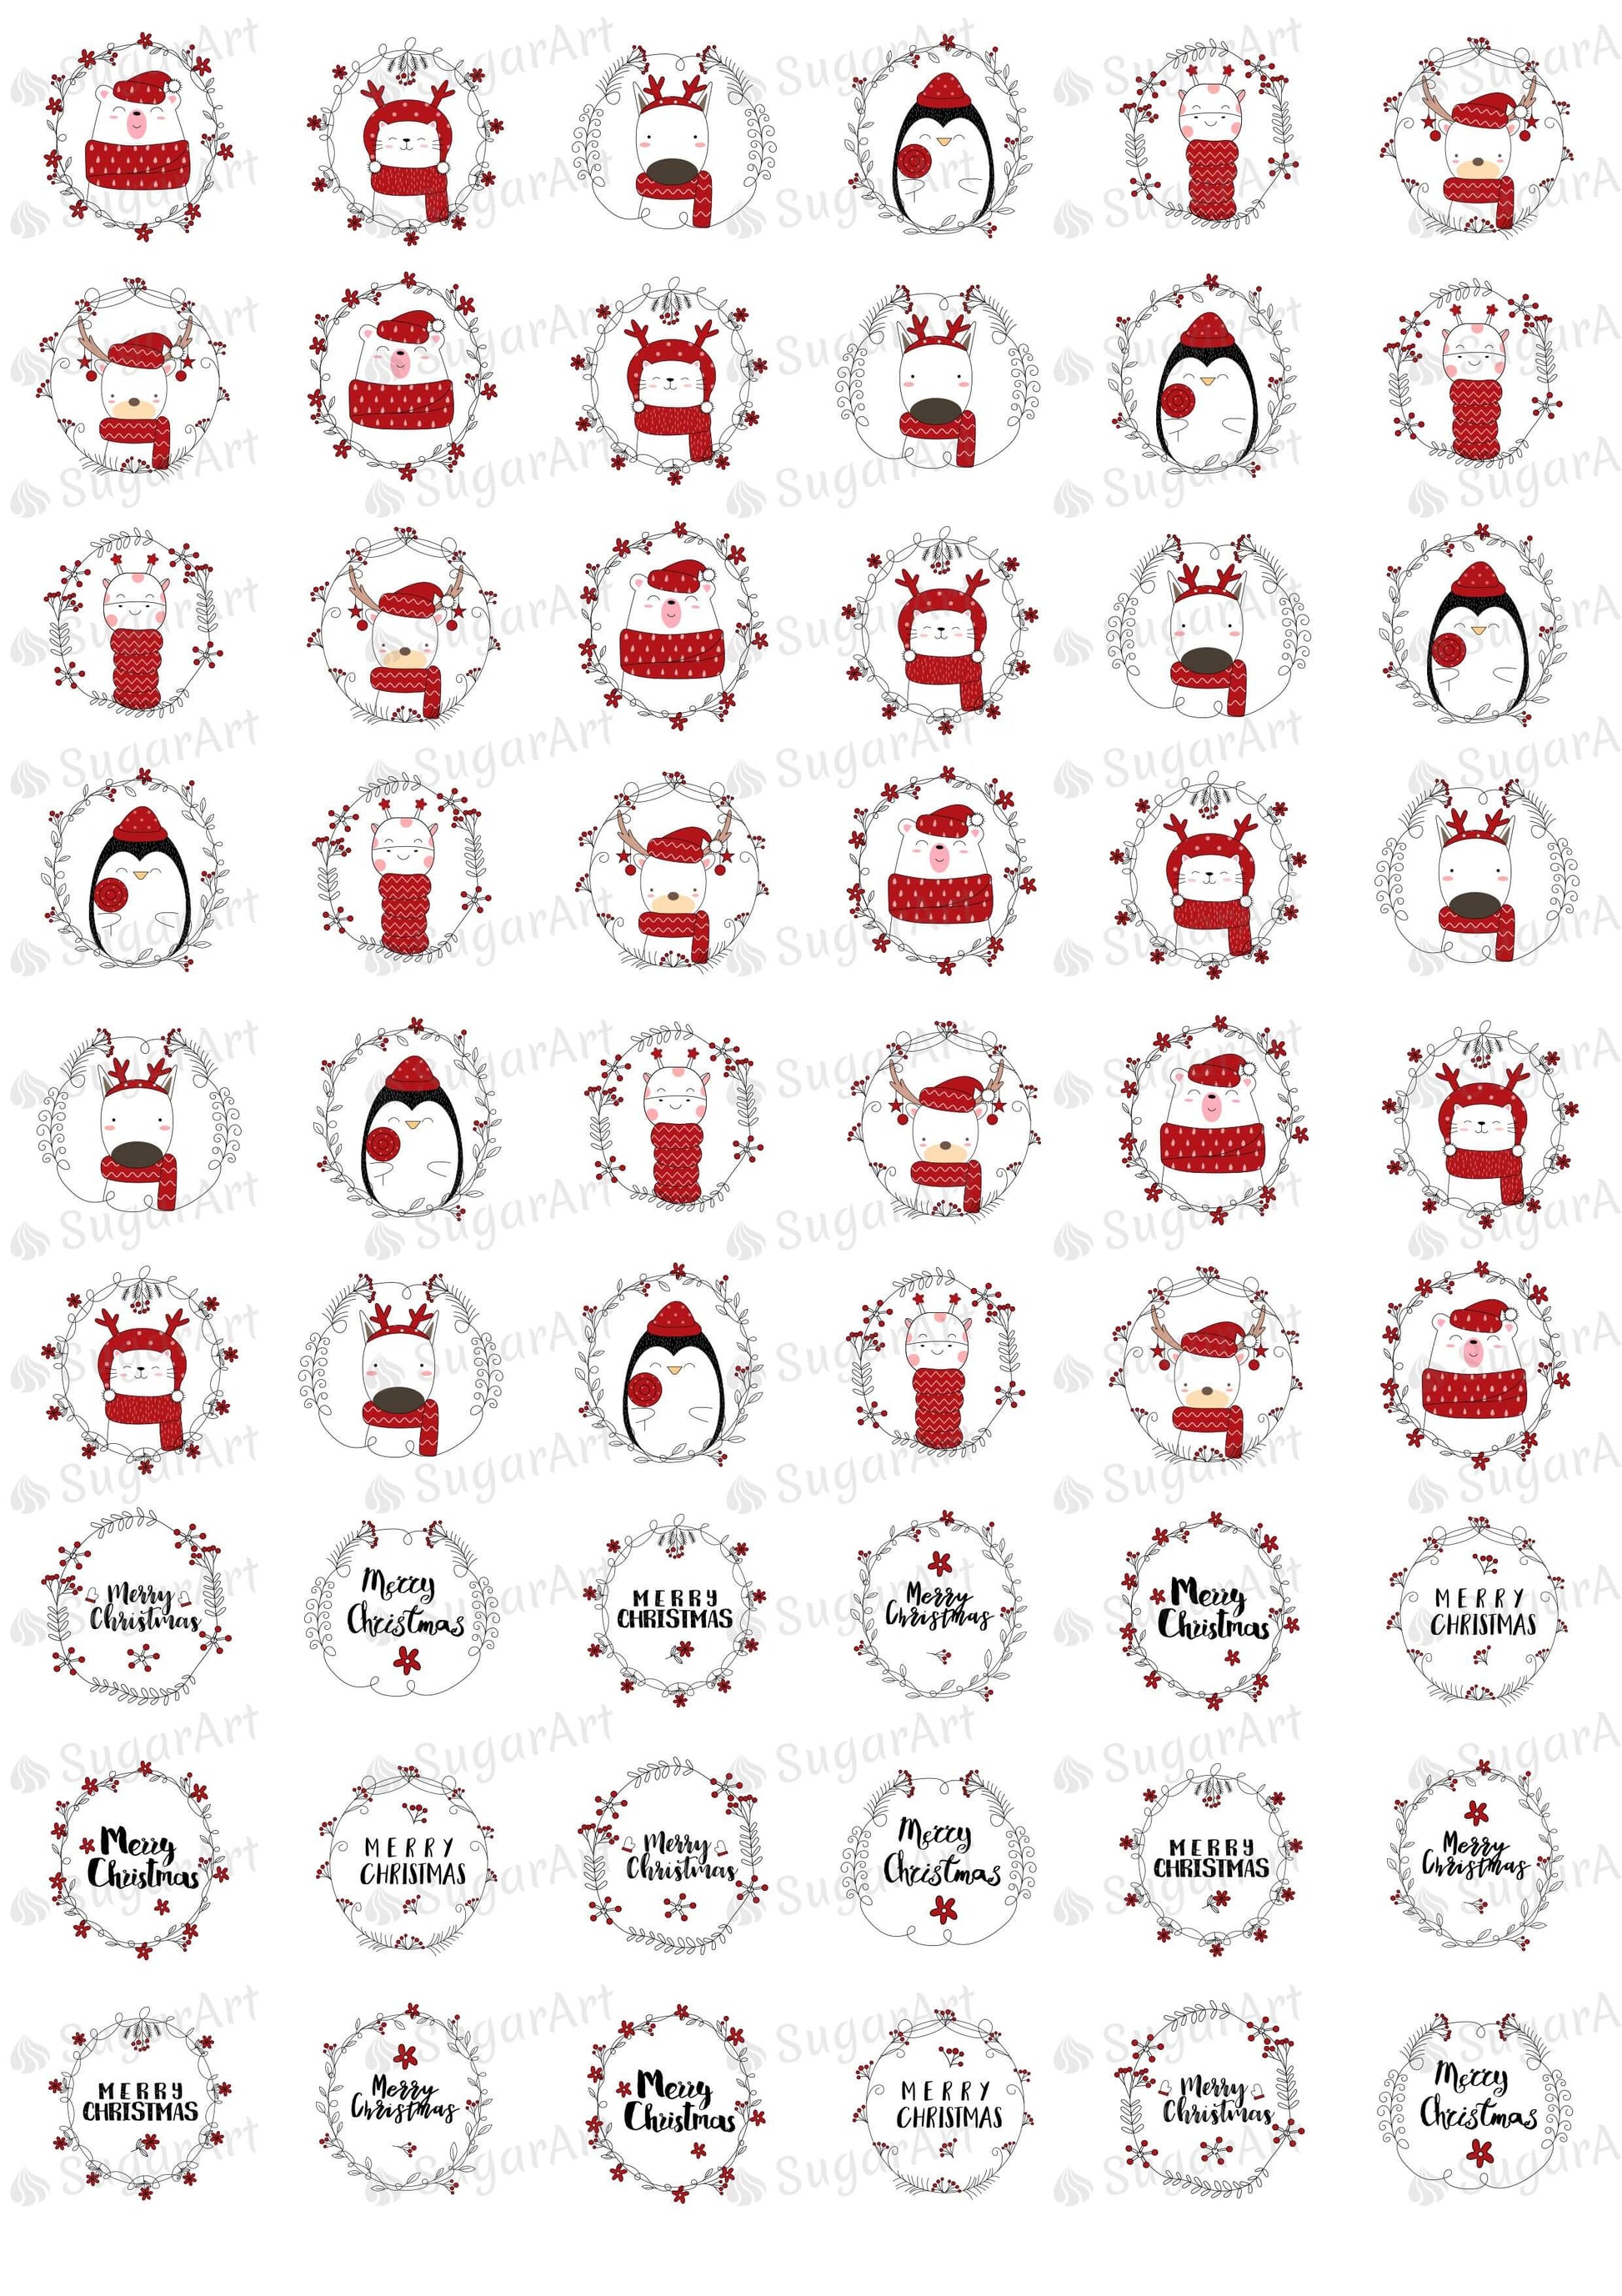 Hand Drawn Christmas Design with Cute Animals - HSA078.